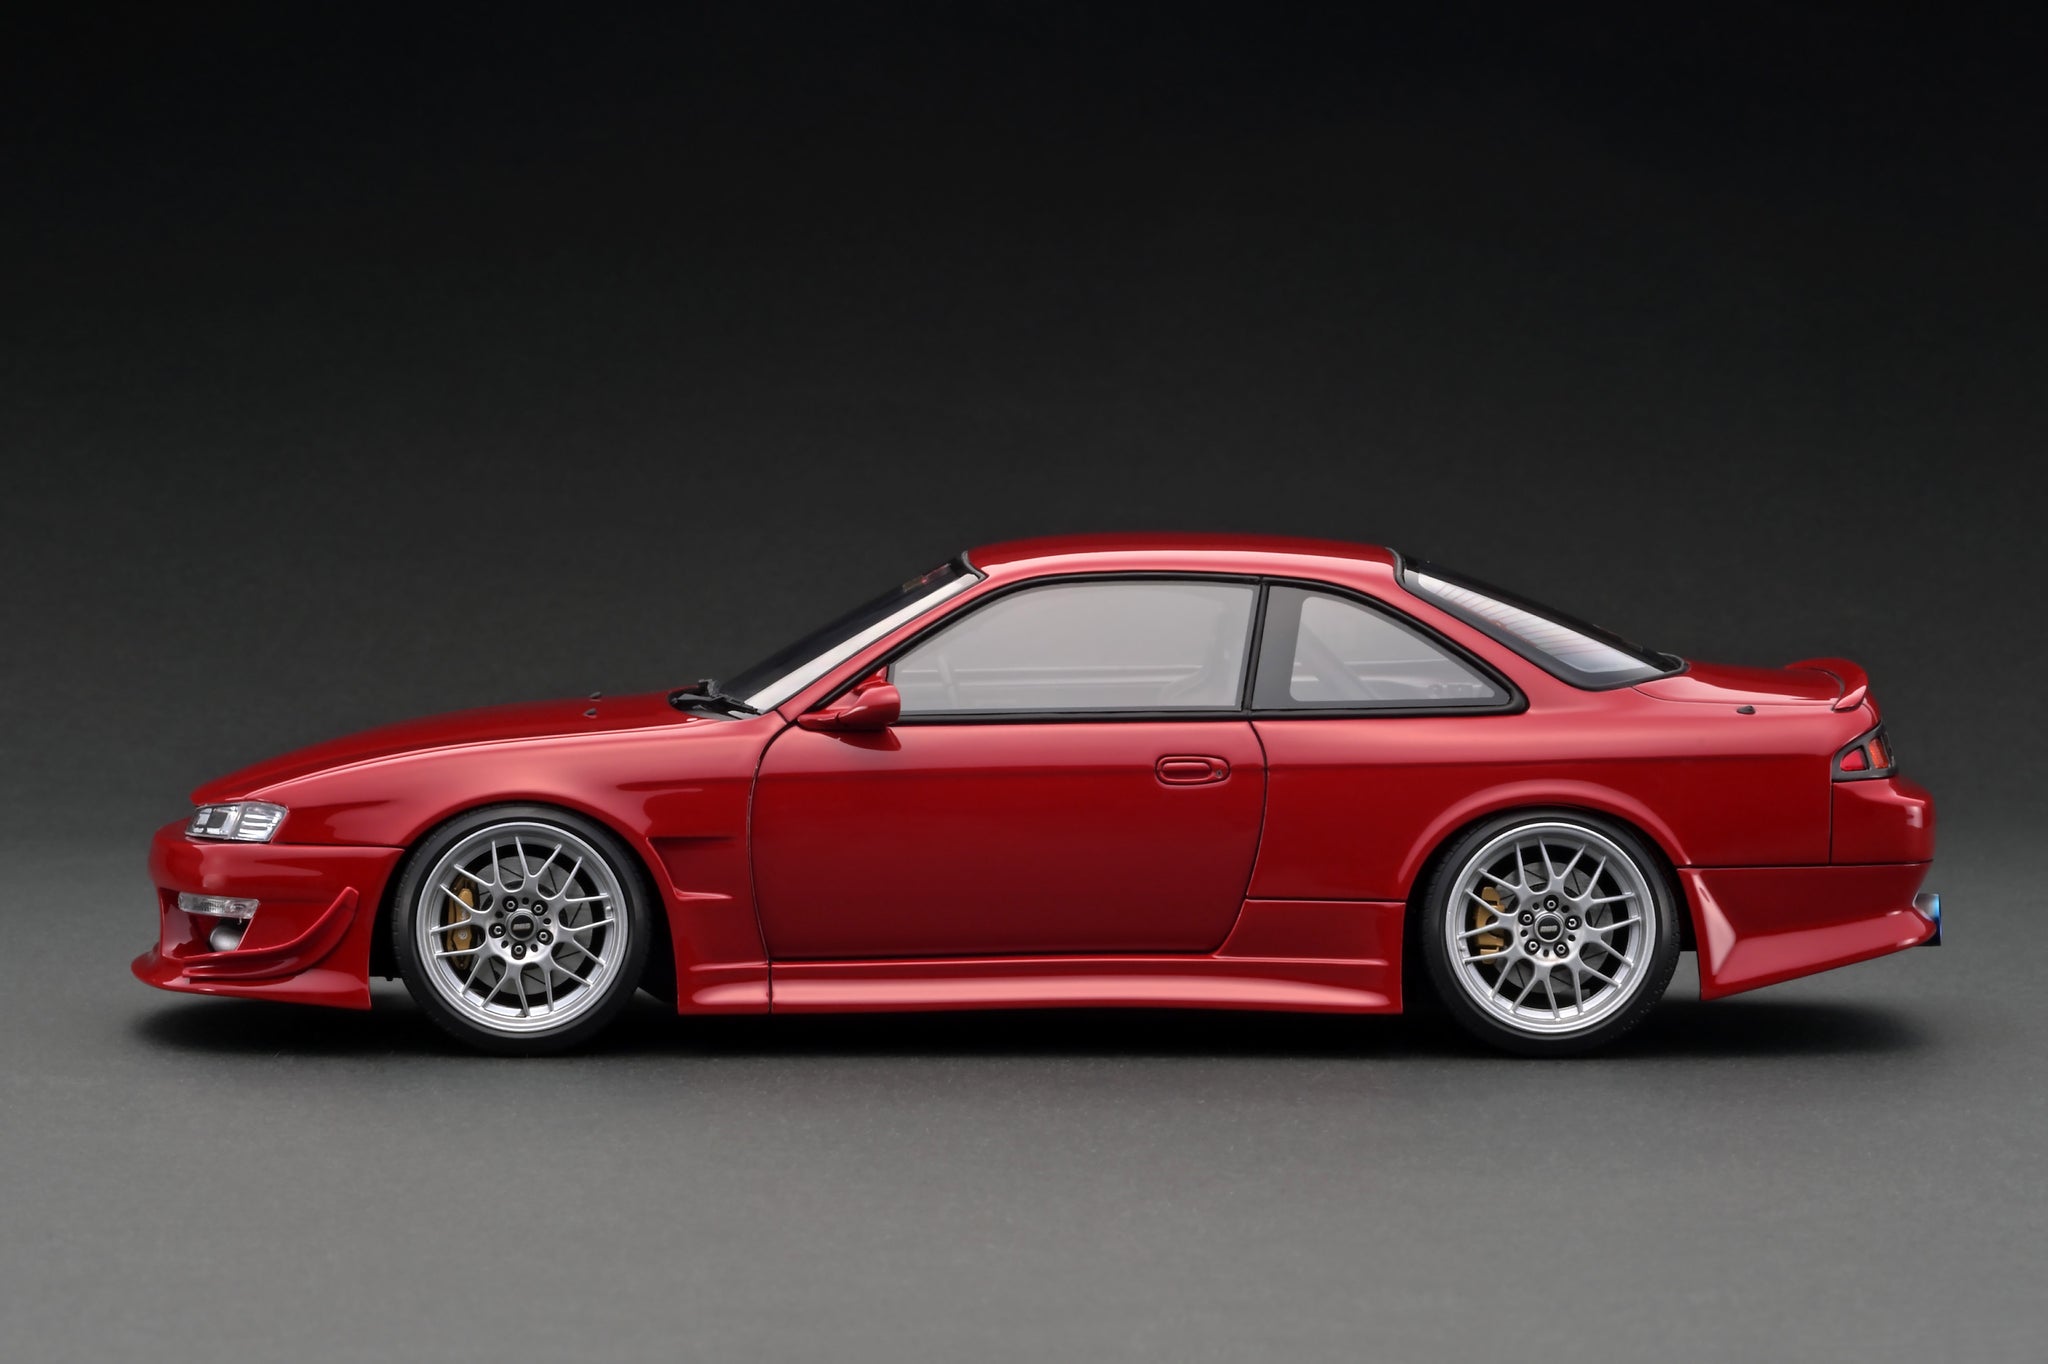 IG3083 VERTEX S14 Silvia Red With SR20 Engine – ignition model